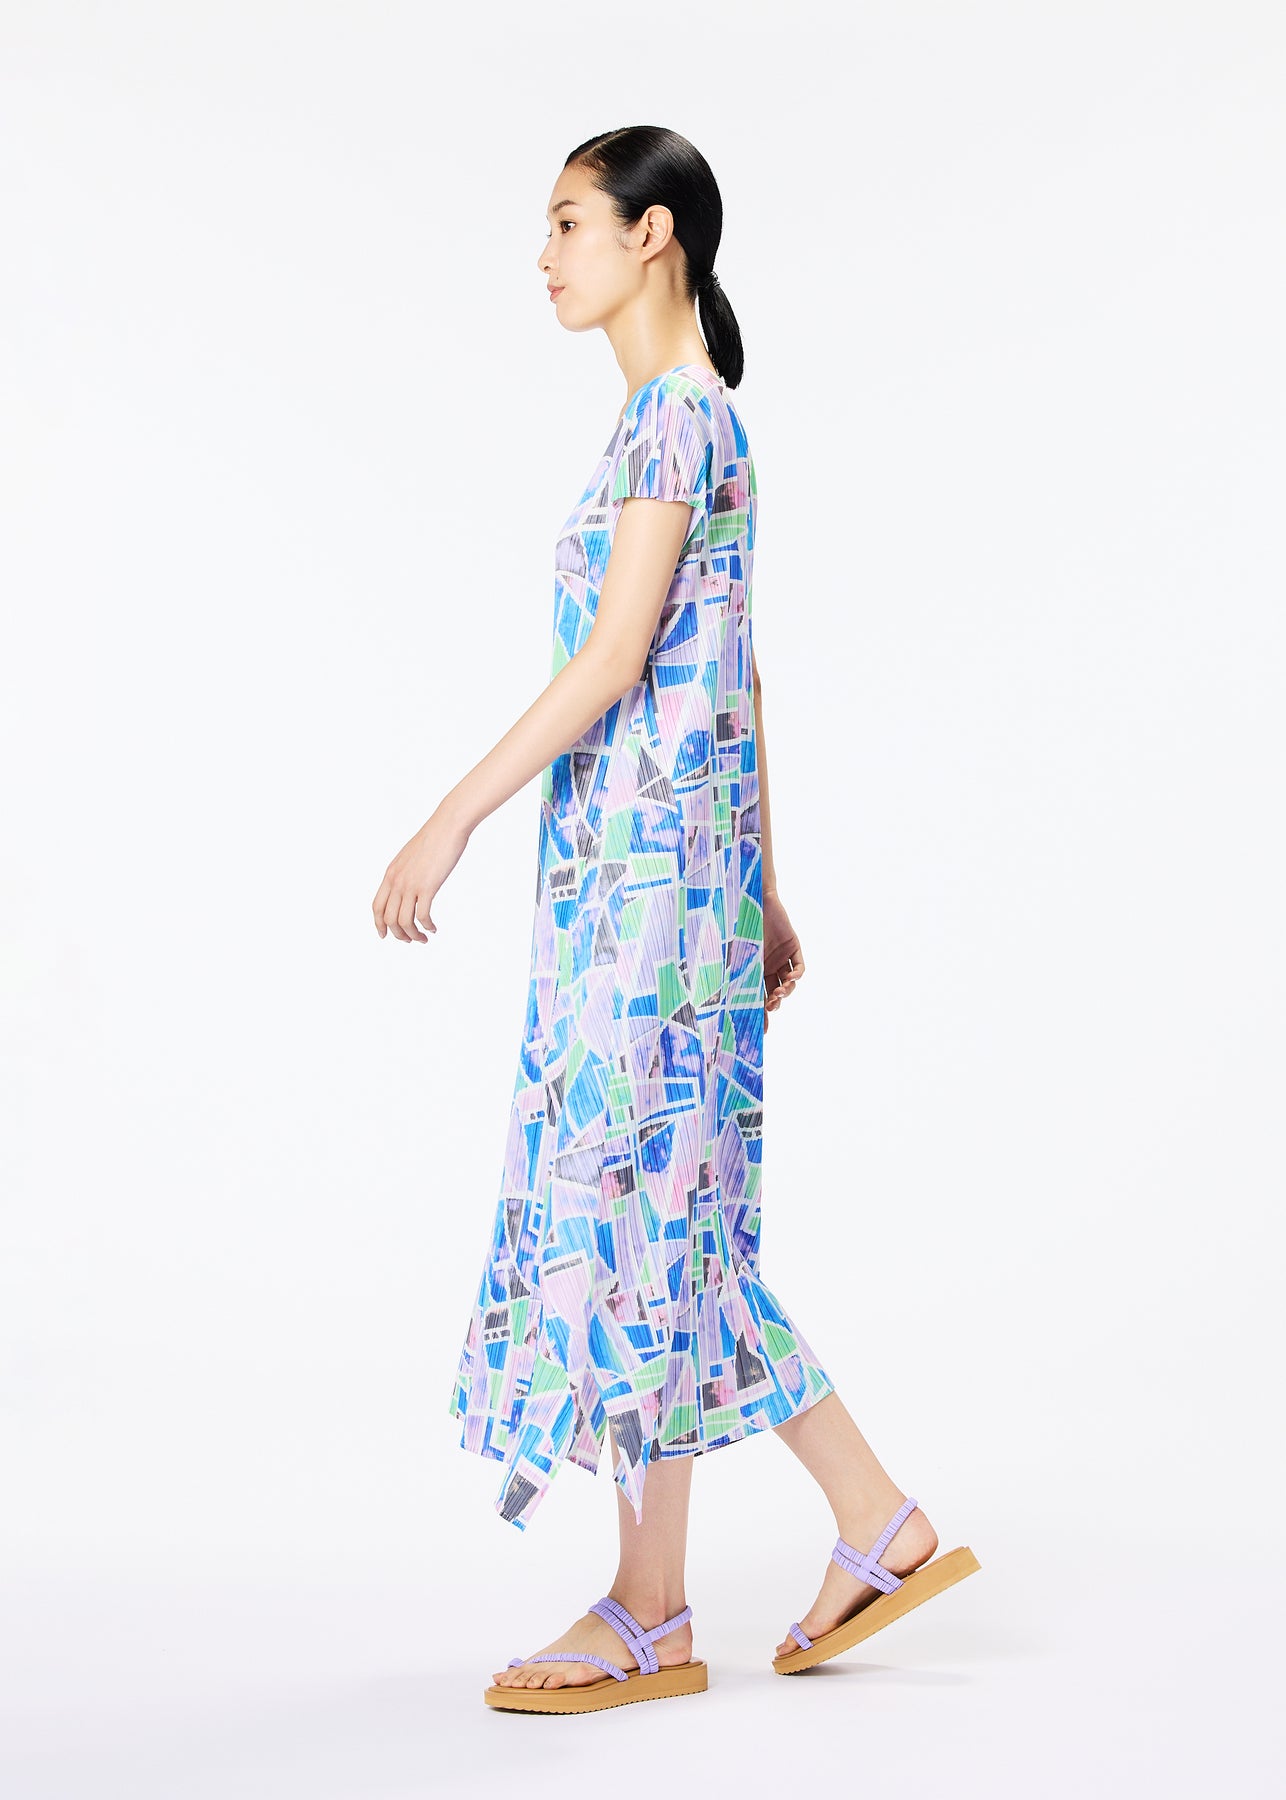 CANAL DRESS | The official ISSEY MIYAKE ONLINE STORE | ISSEY